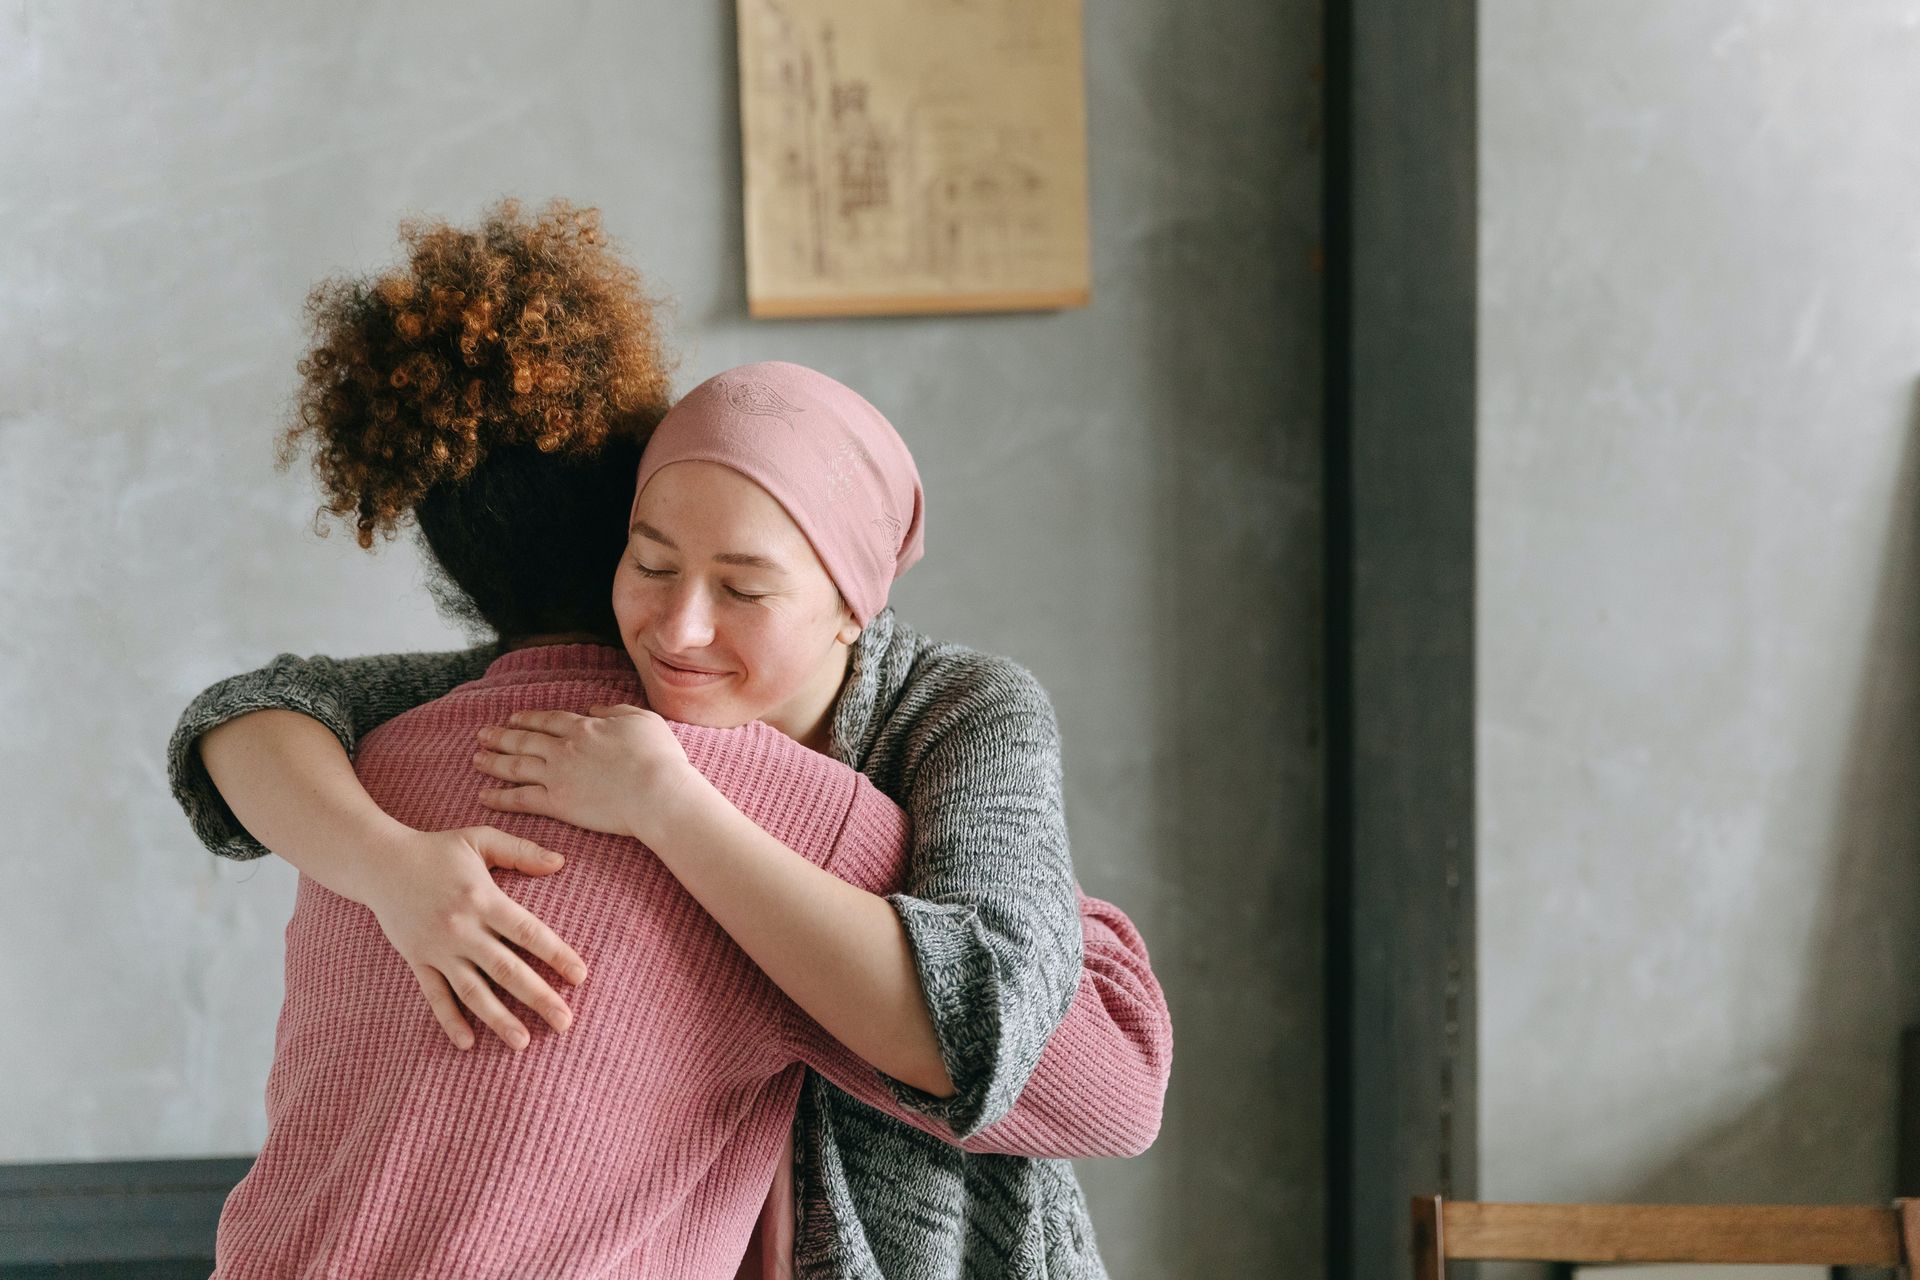 women hugging, emotional support, how to find happiness